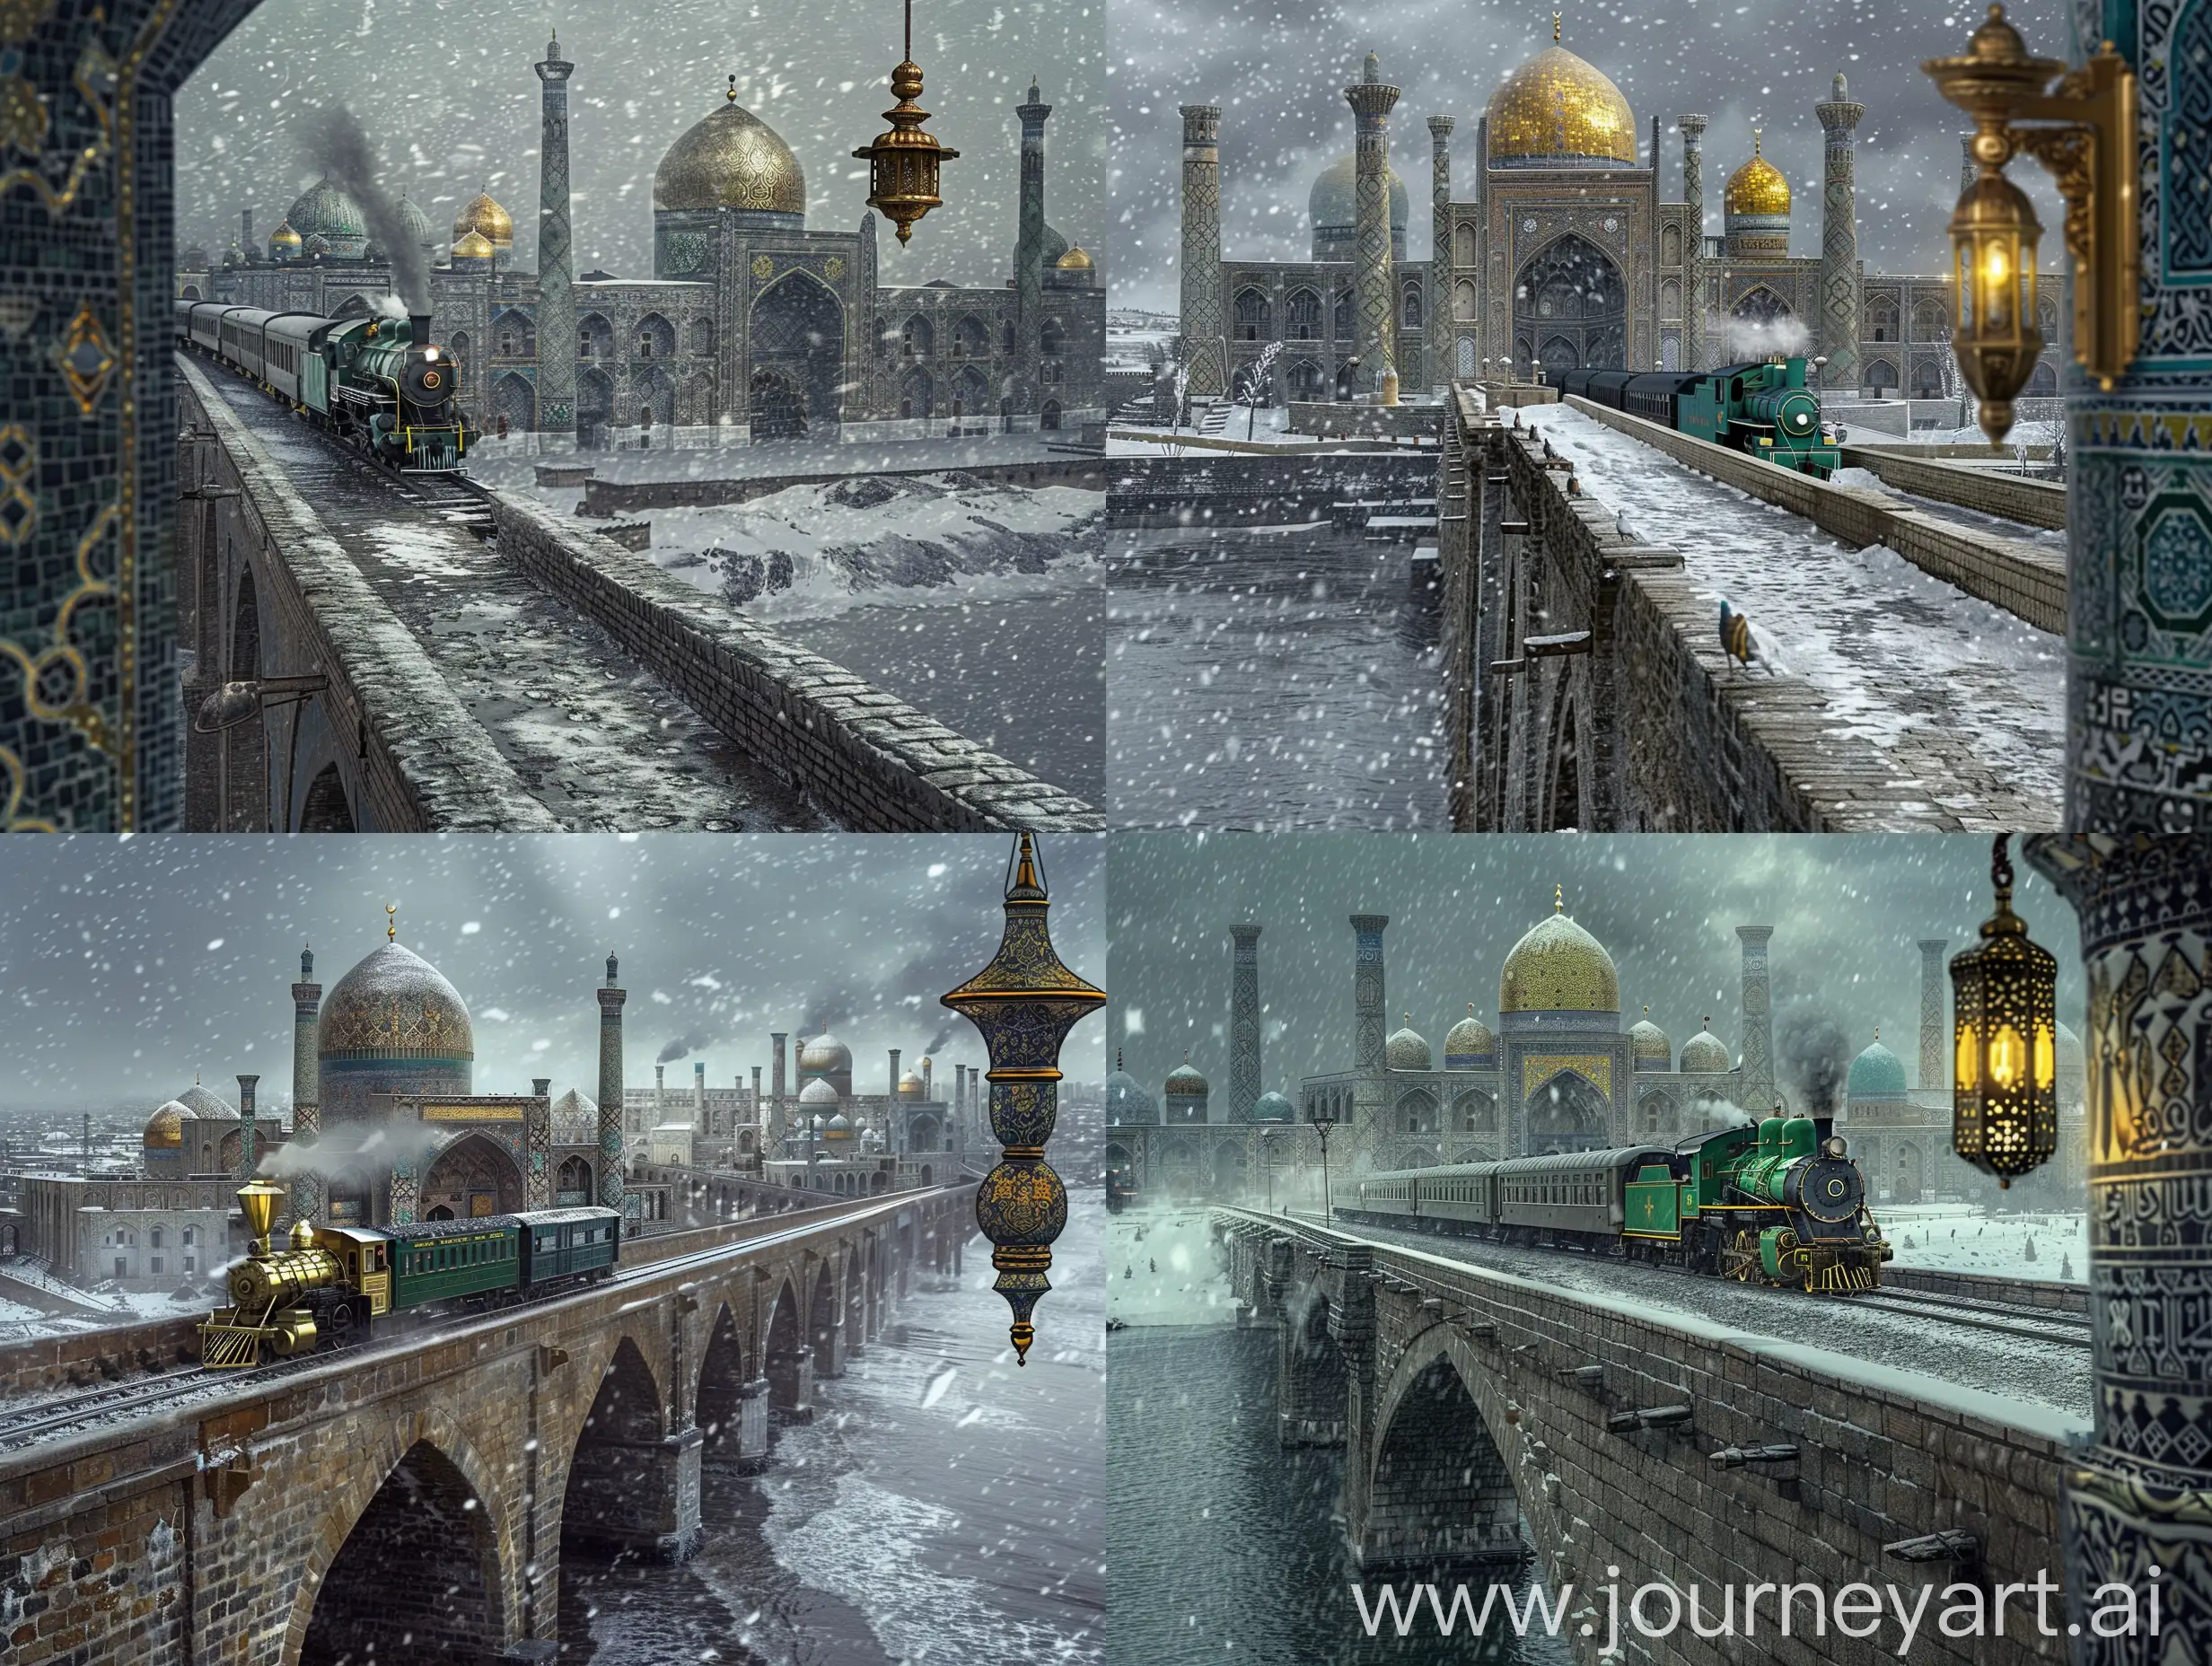 Cinematic-Stonebridge-Crossing-Majestic-Steam-Engine-Train-in-a-PersianTiled-Seafront-City